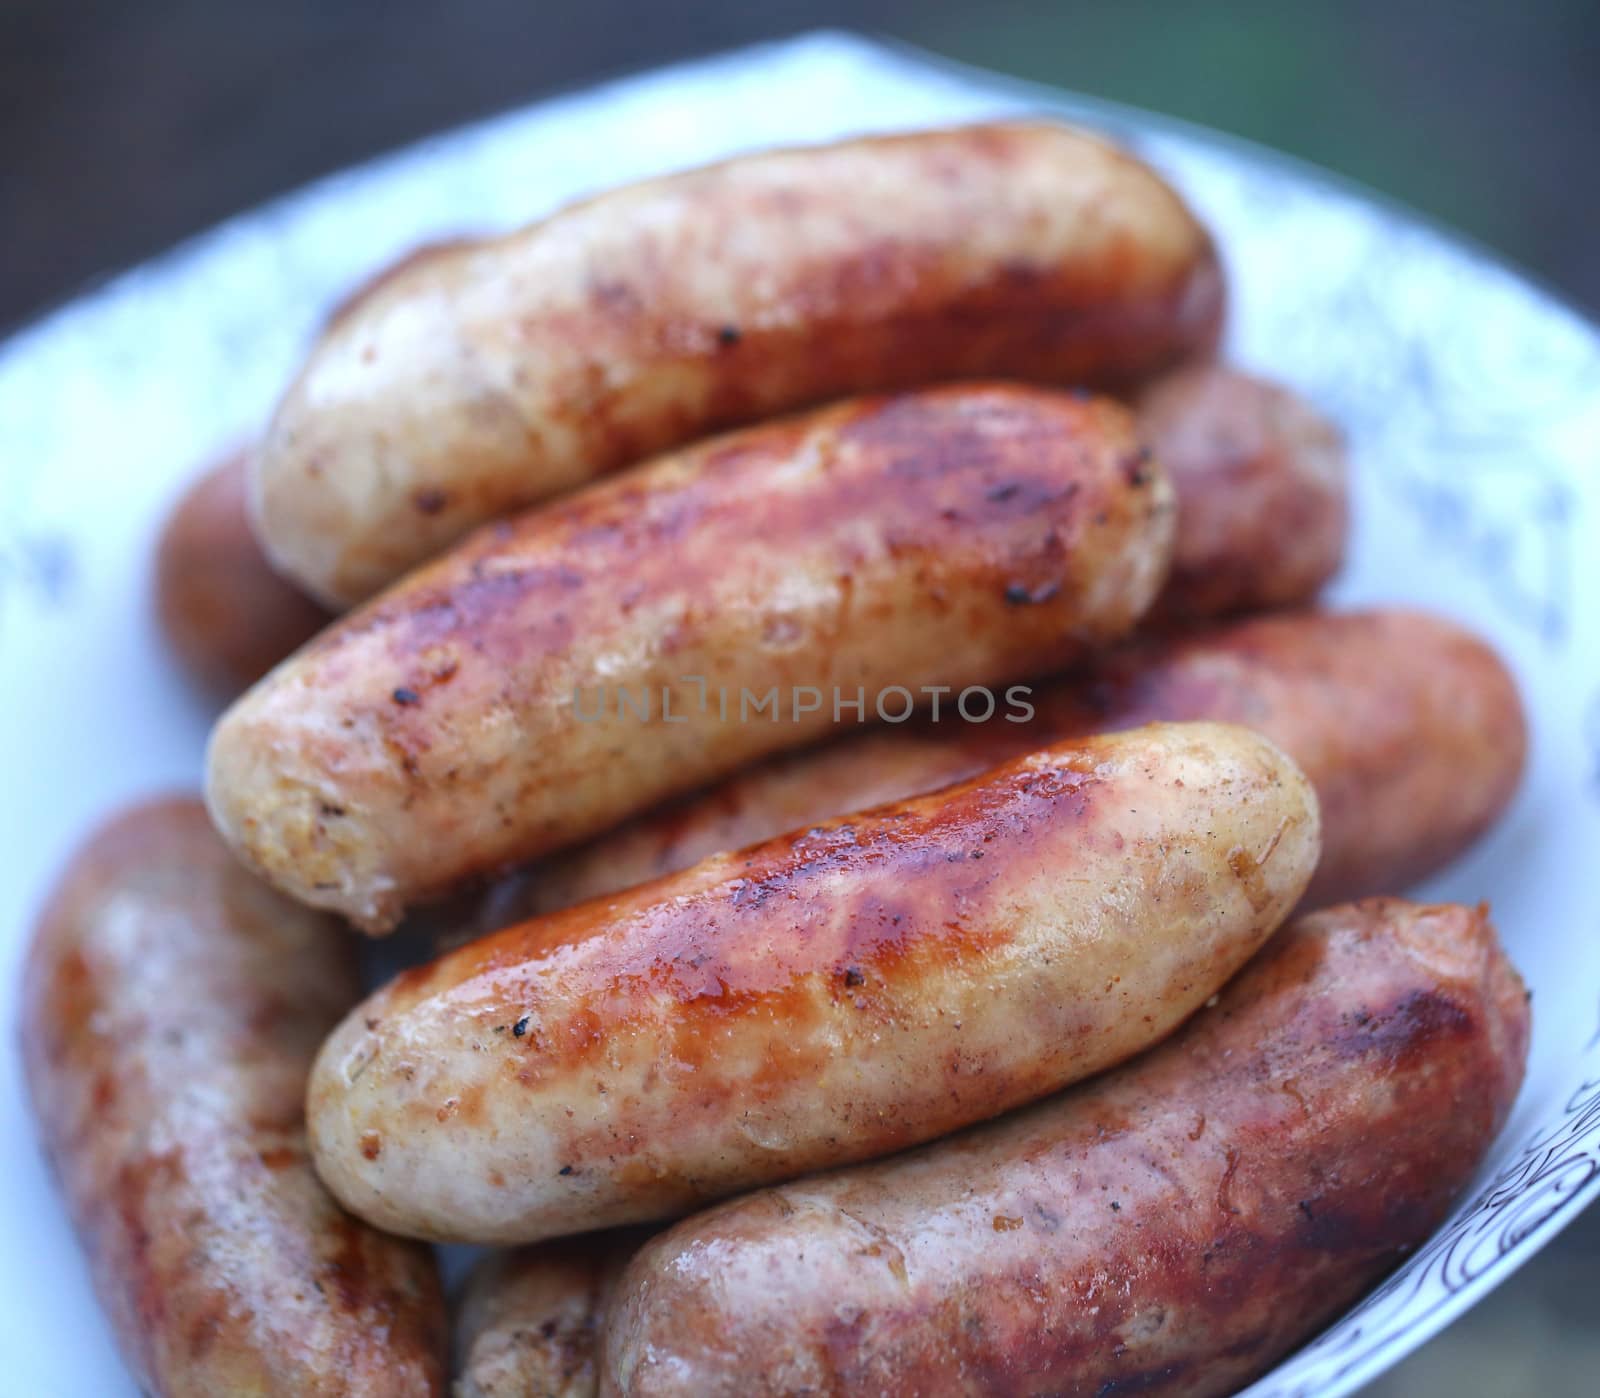 Pork sausages barbecued on the plate by indigolotos